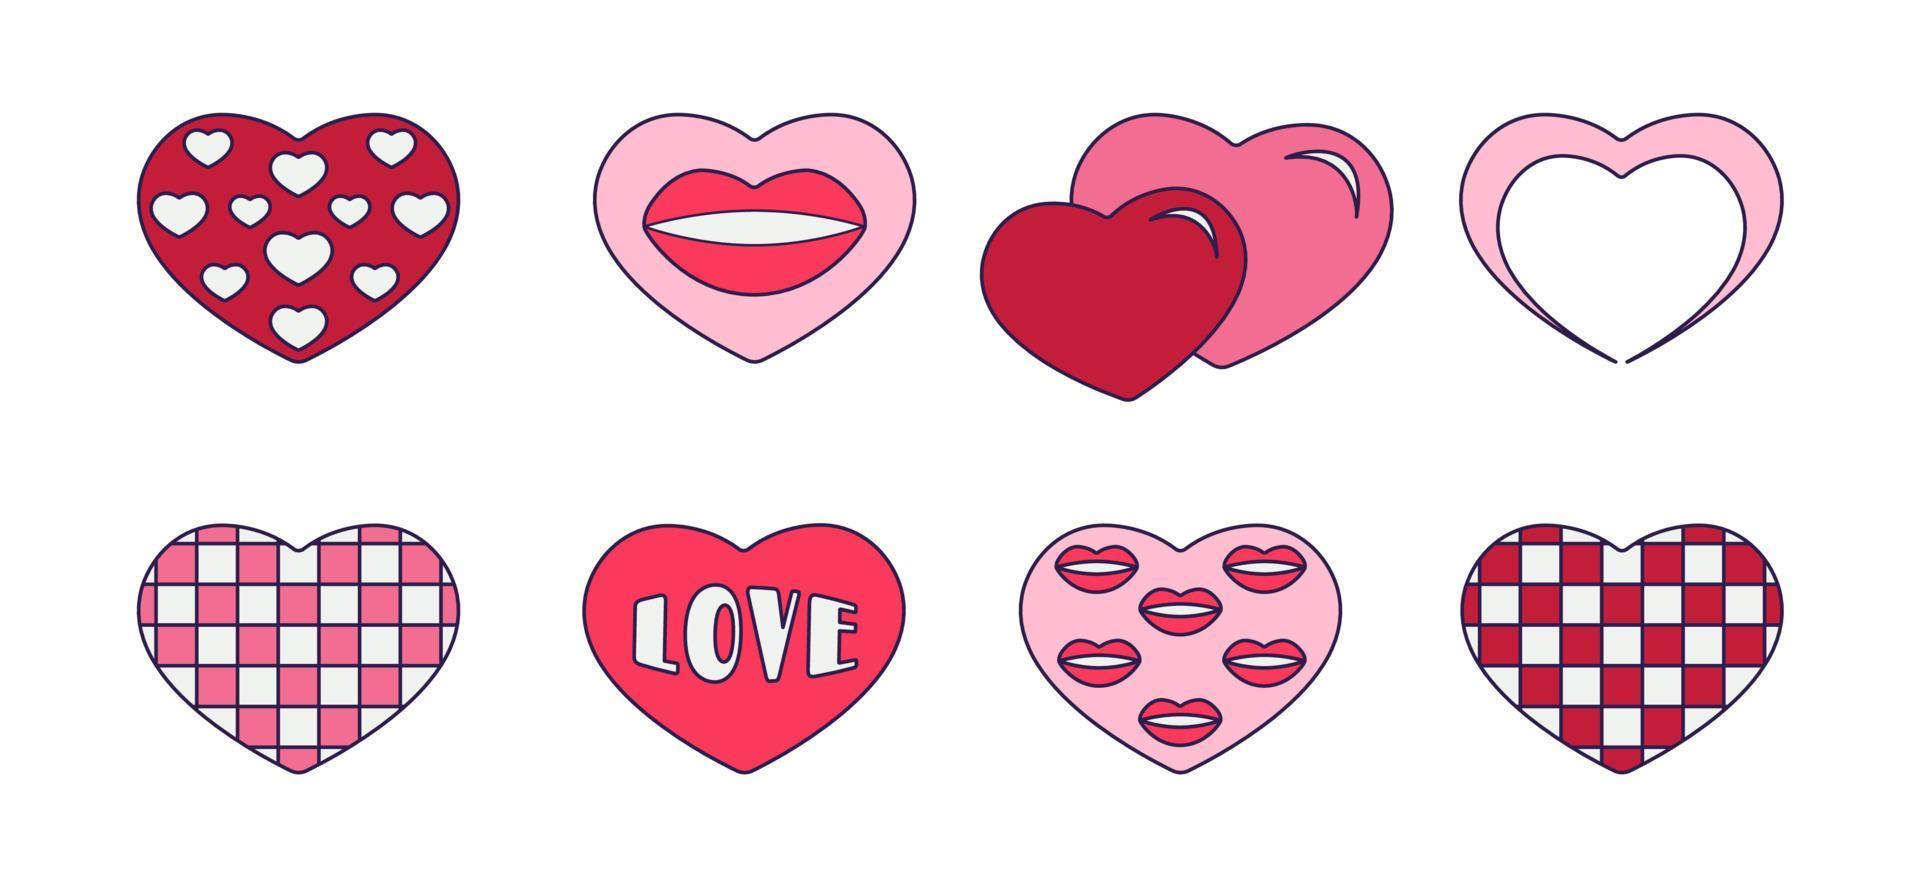 Retro Valentine Day set of icons of heart. Love symbols in the fashionable pop line art style. The shape of different hearts in soft pink, coral and red color. Vector illustration isolated on white.